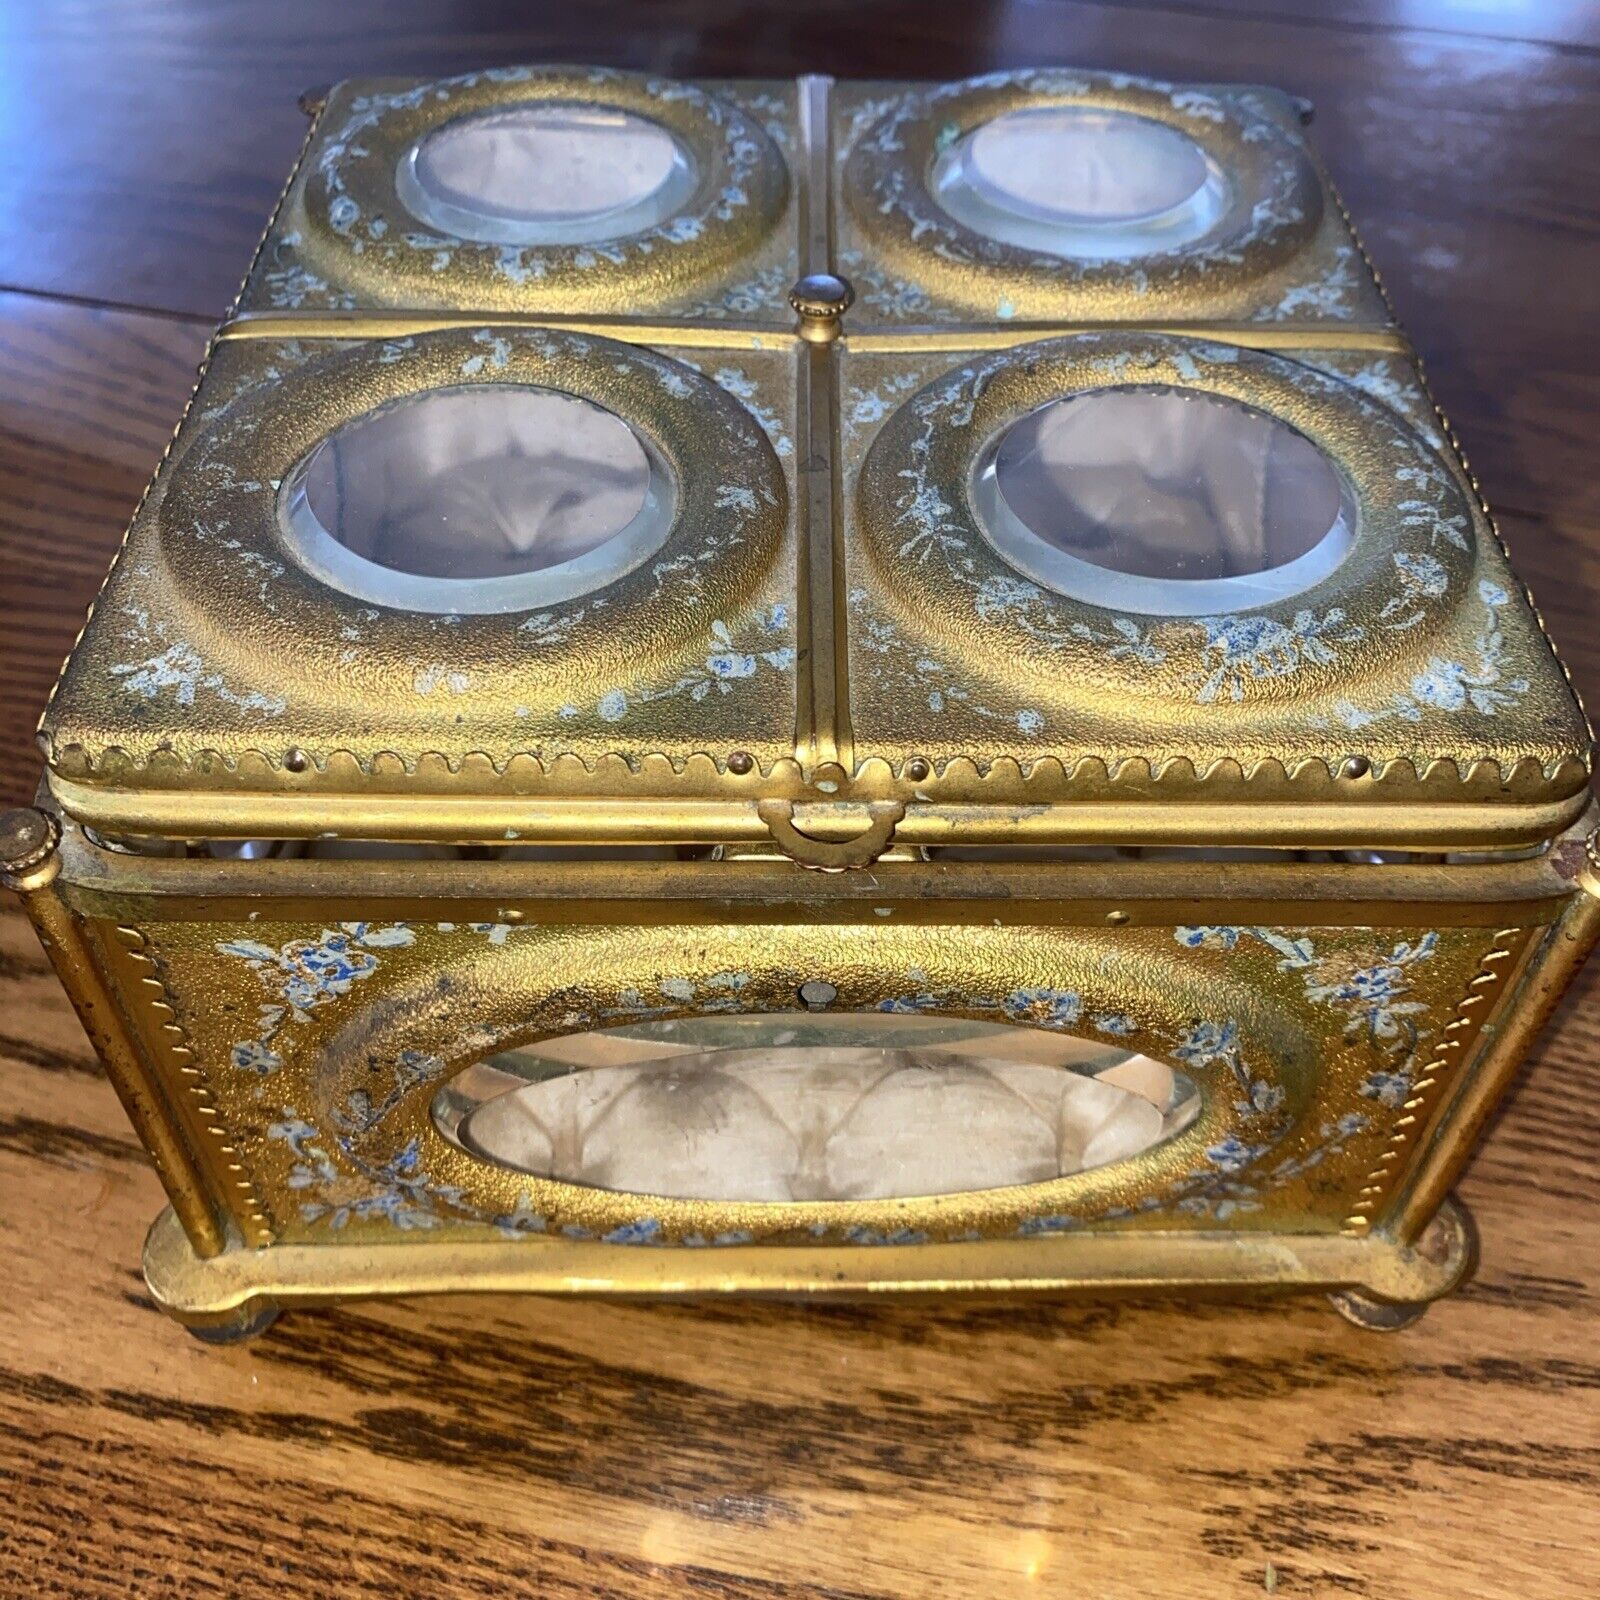 19th Century French (Ormolu?) Jewelry Box- Metal w/orig lining- Fit for a crown